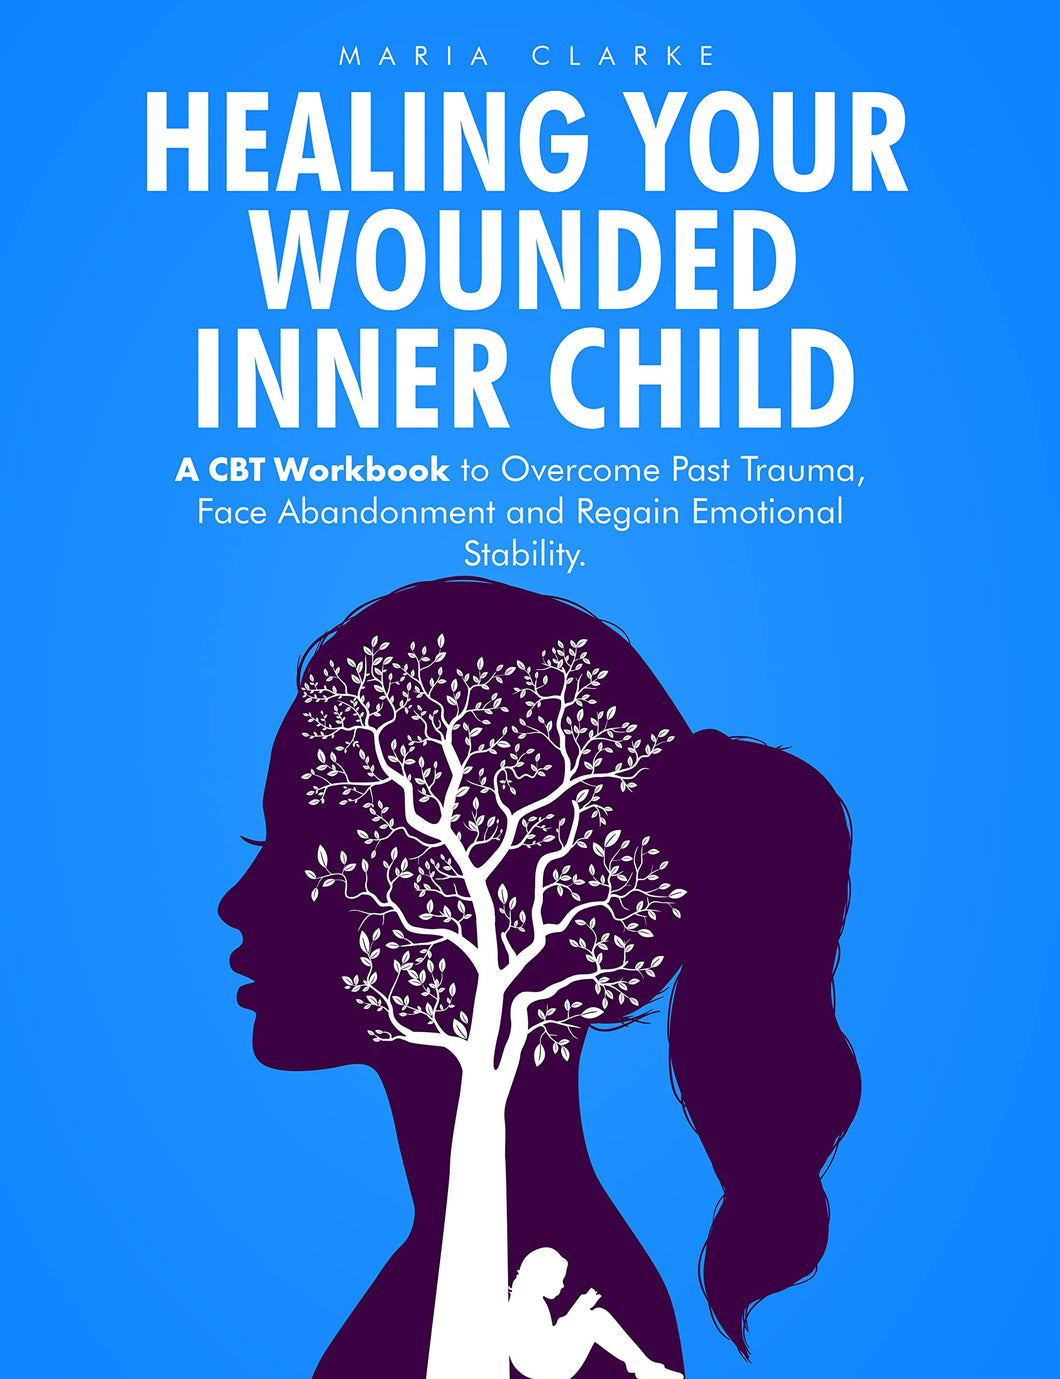 Healing Your Wounded Inner Child; A CBT Workbook by Maria Clarke - INSTANT DOWNLOAD